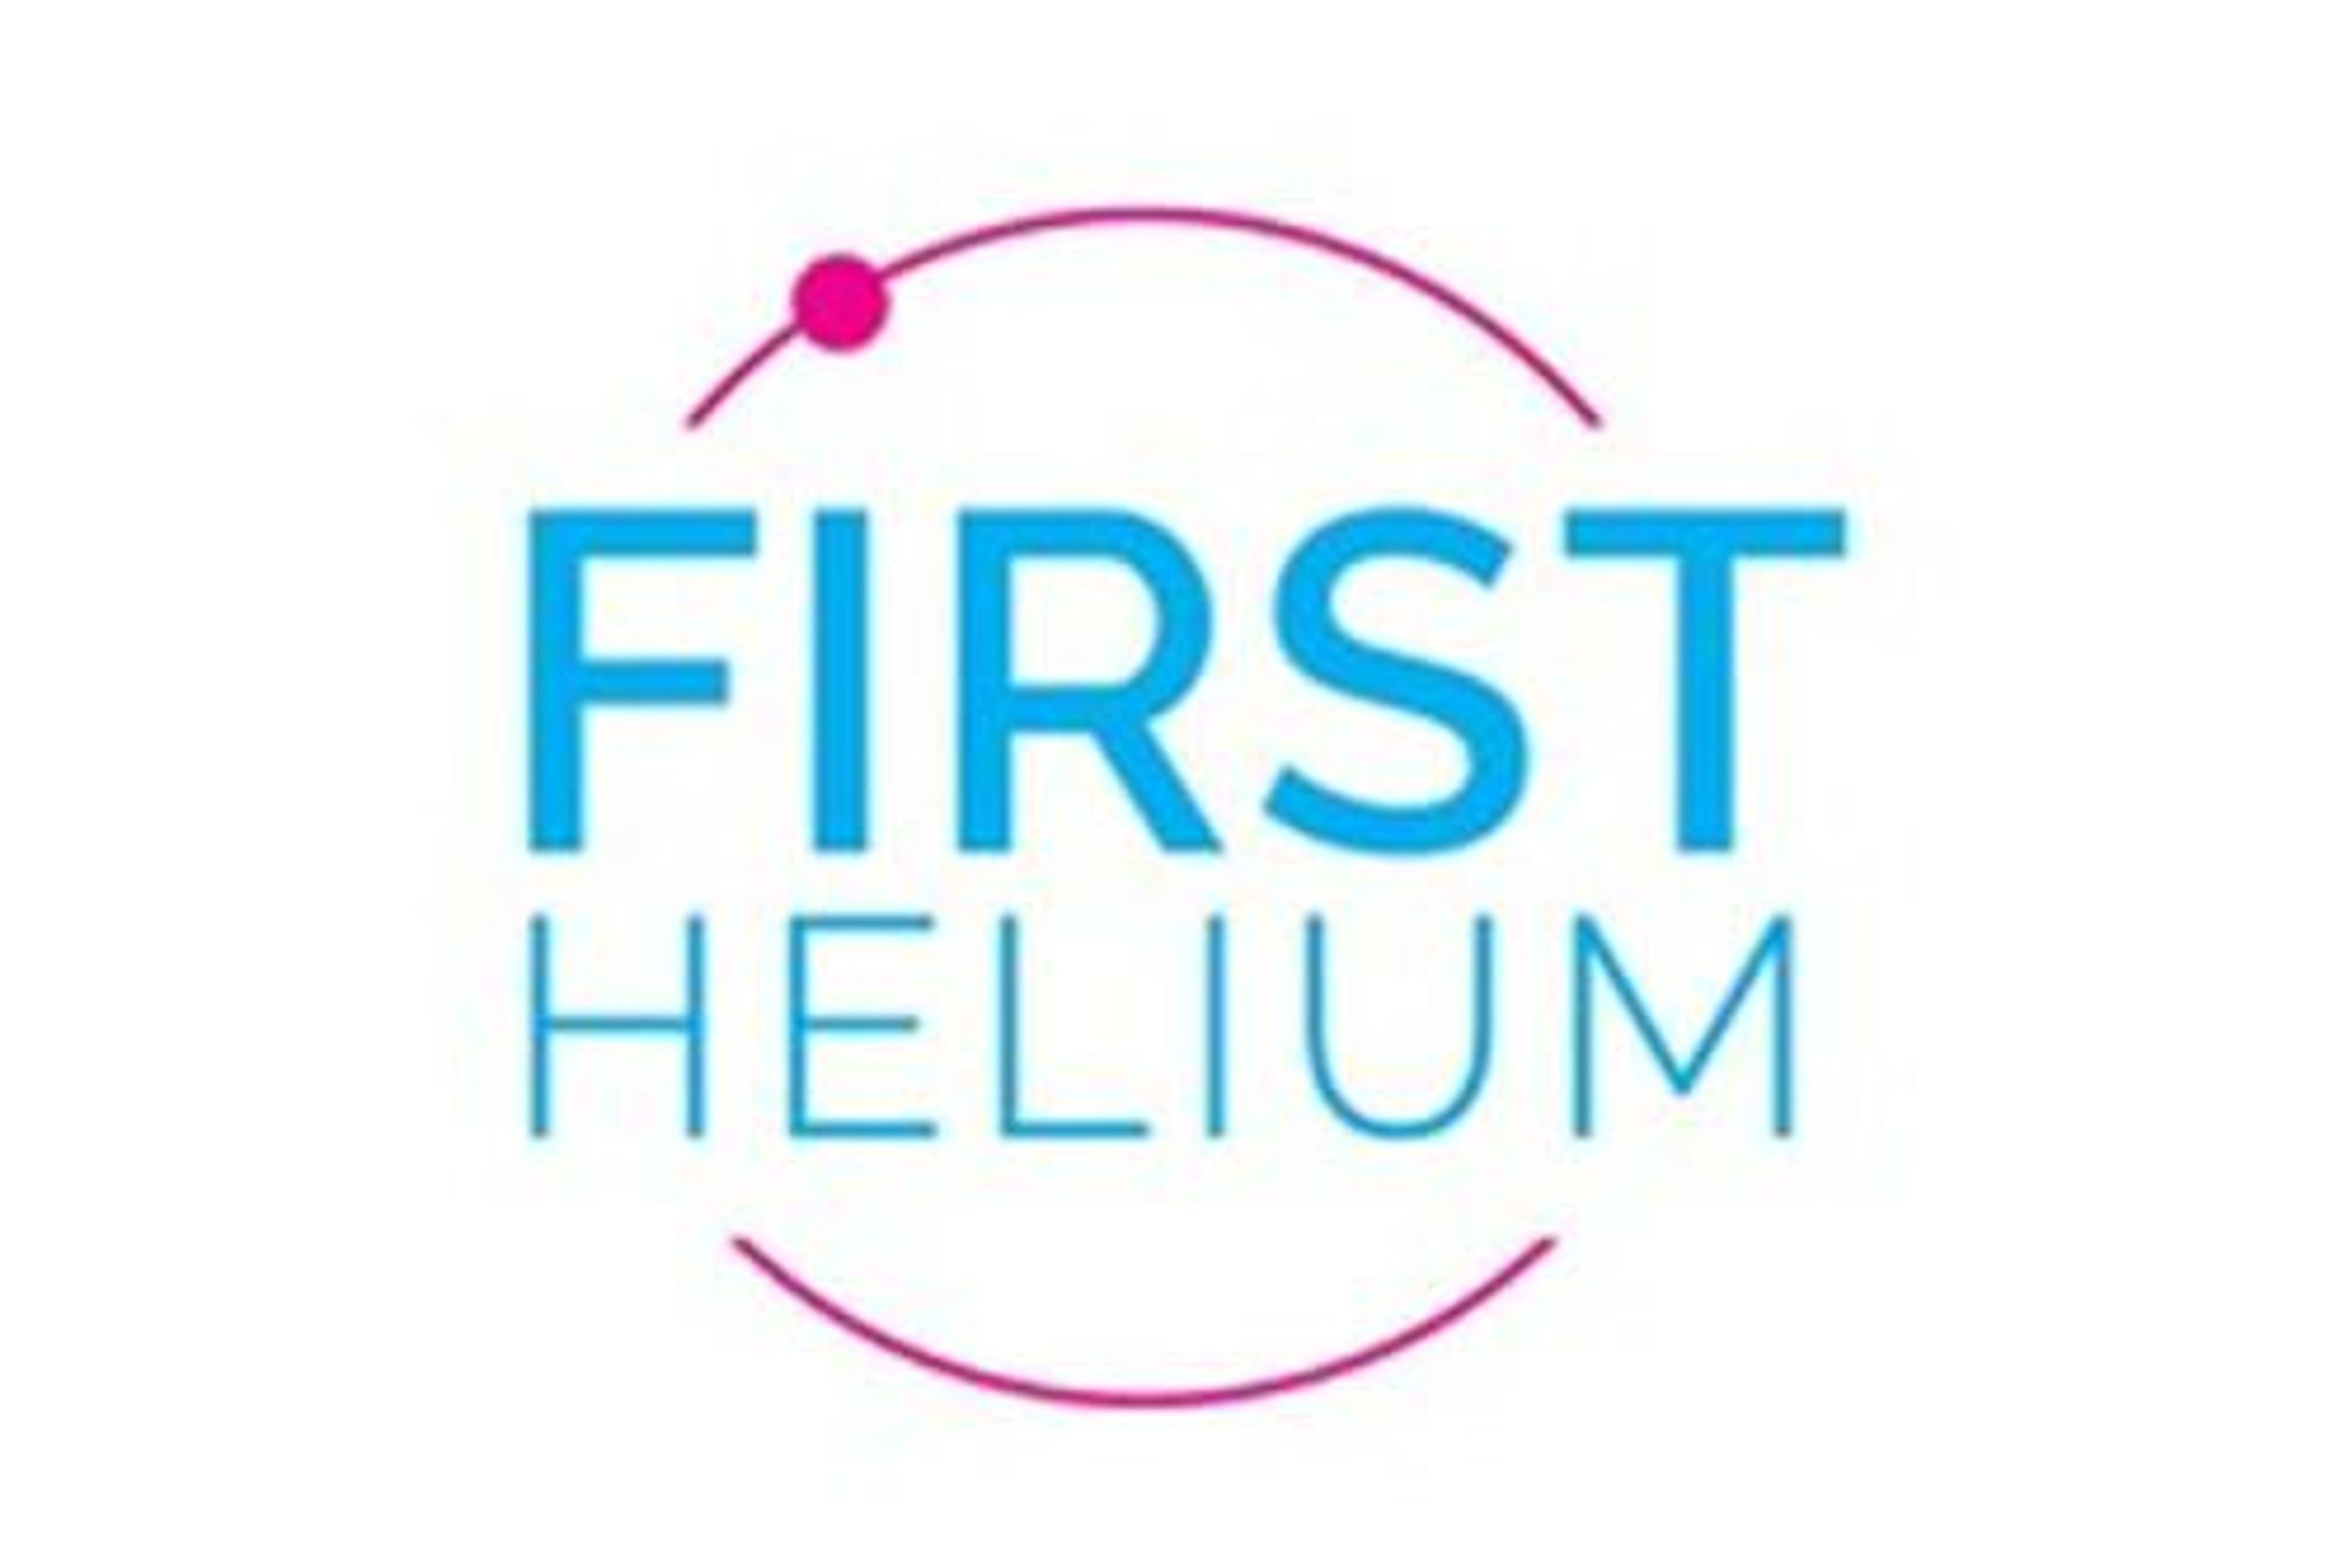 First Helium Announces "4-29" Light Oil Discovery at Worsley